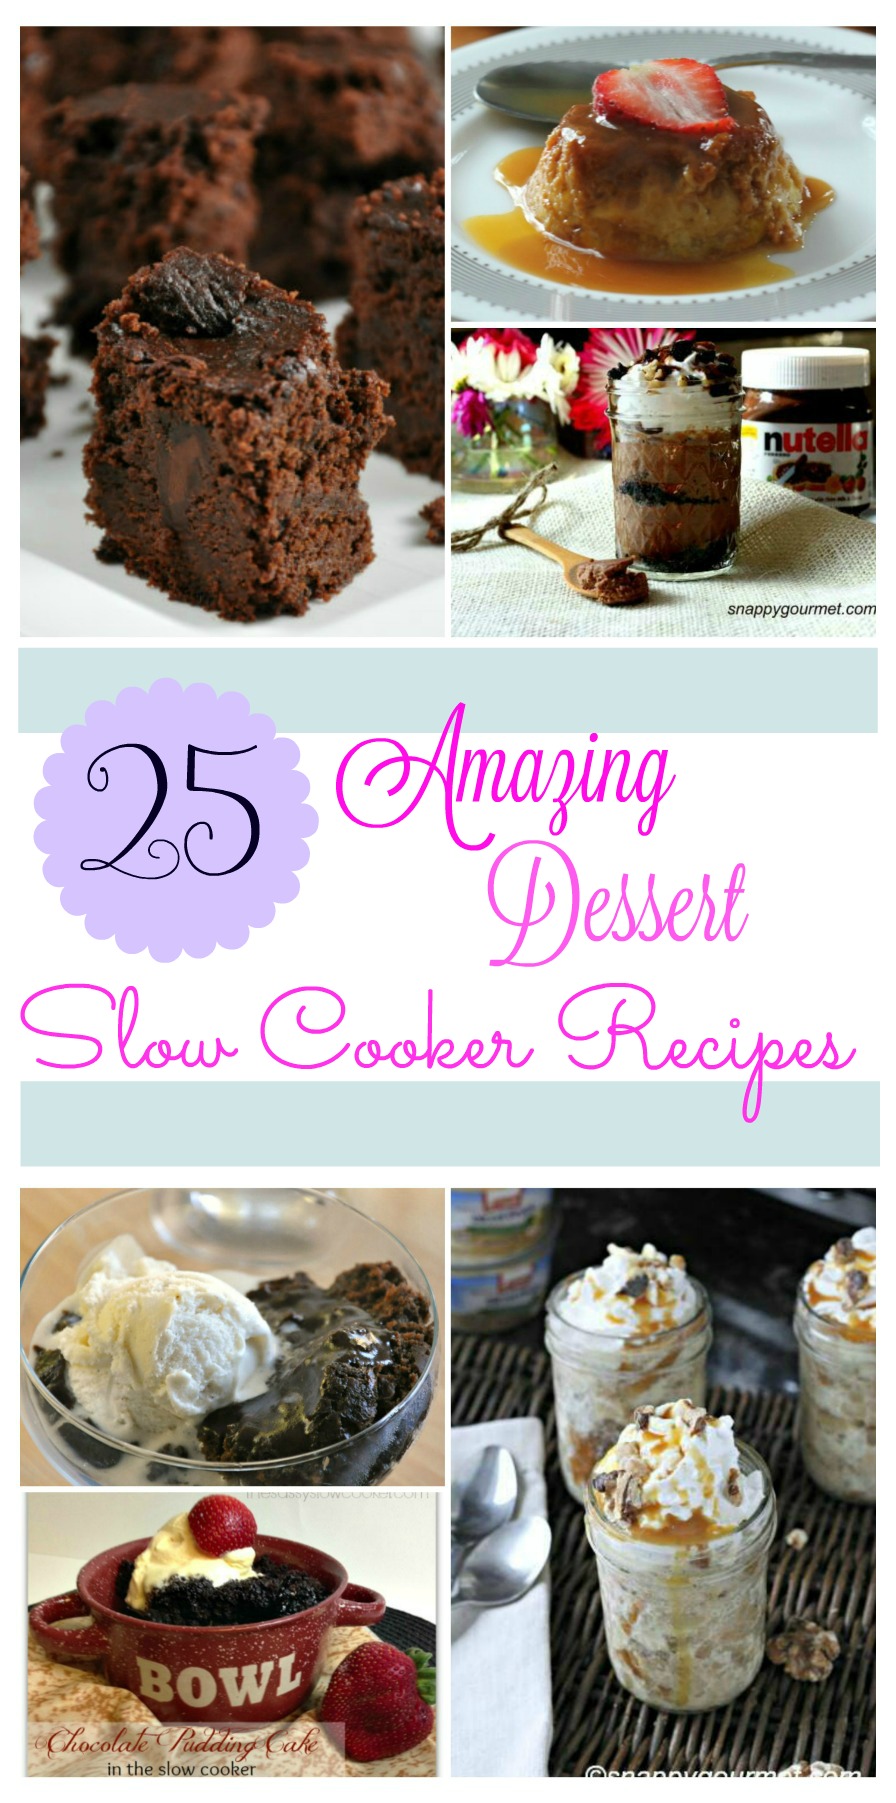 Looking for delicious dessert recipes for your slow cooker? Check out these 25 Amazing Dessert Slow Cooker Recipes that are perfect for any family!